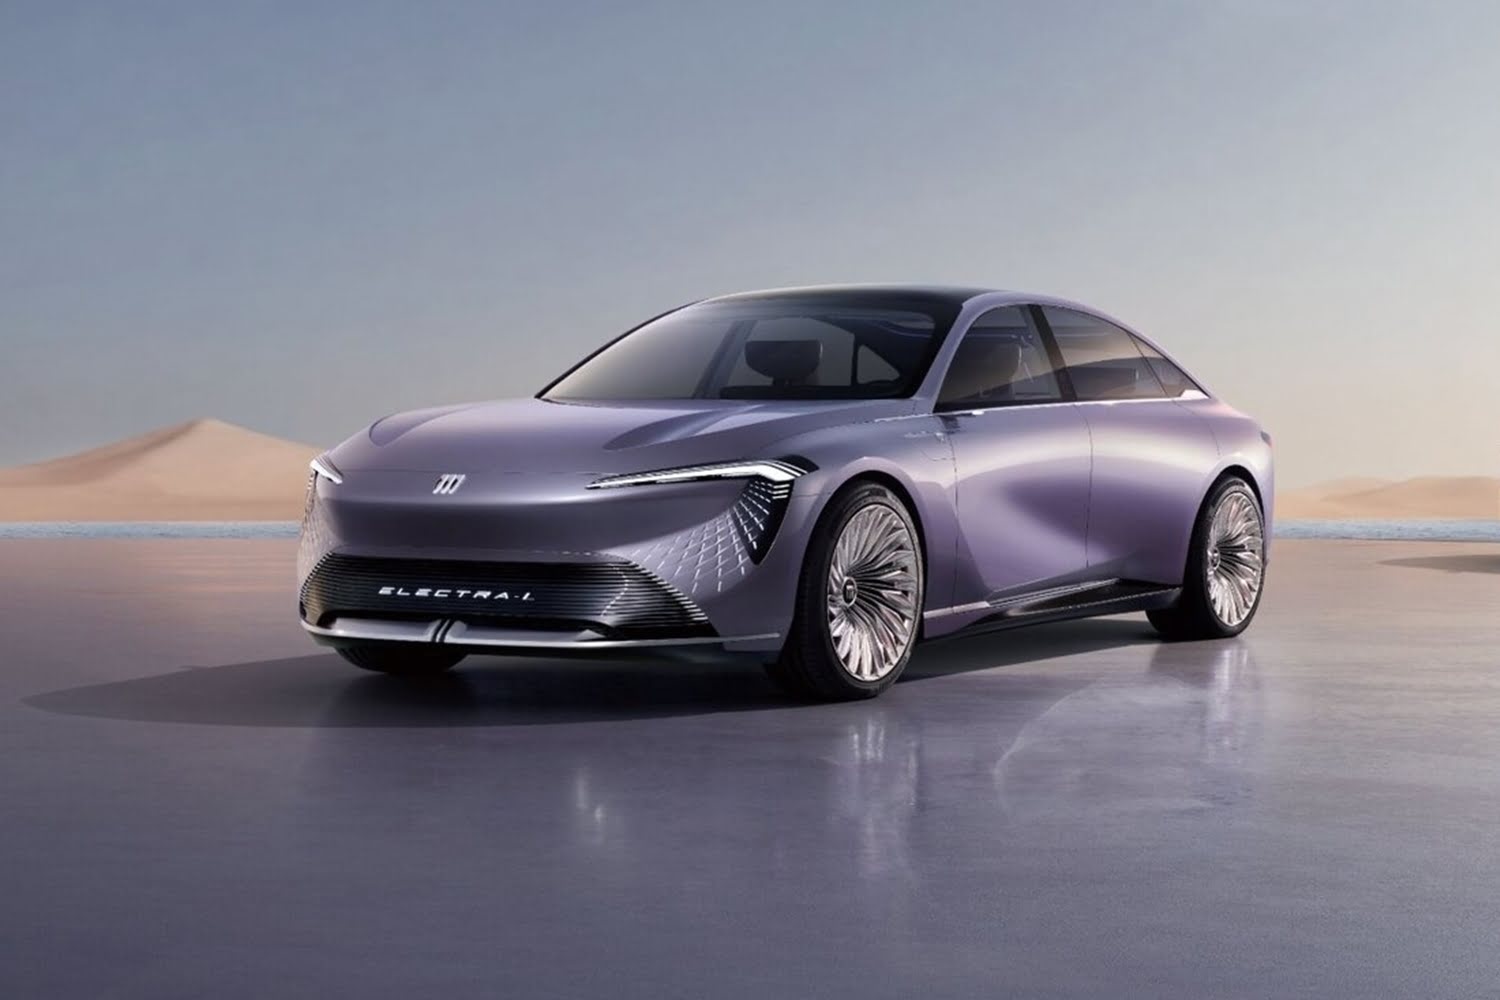 Buick Electra-L Concept Electric Sedan Unveiled In China